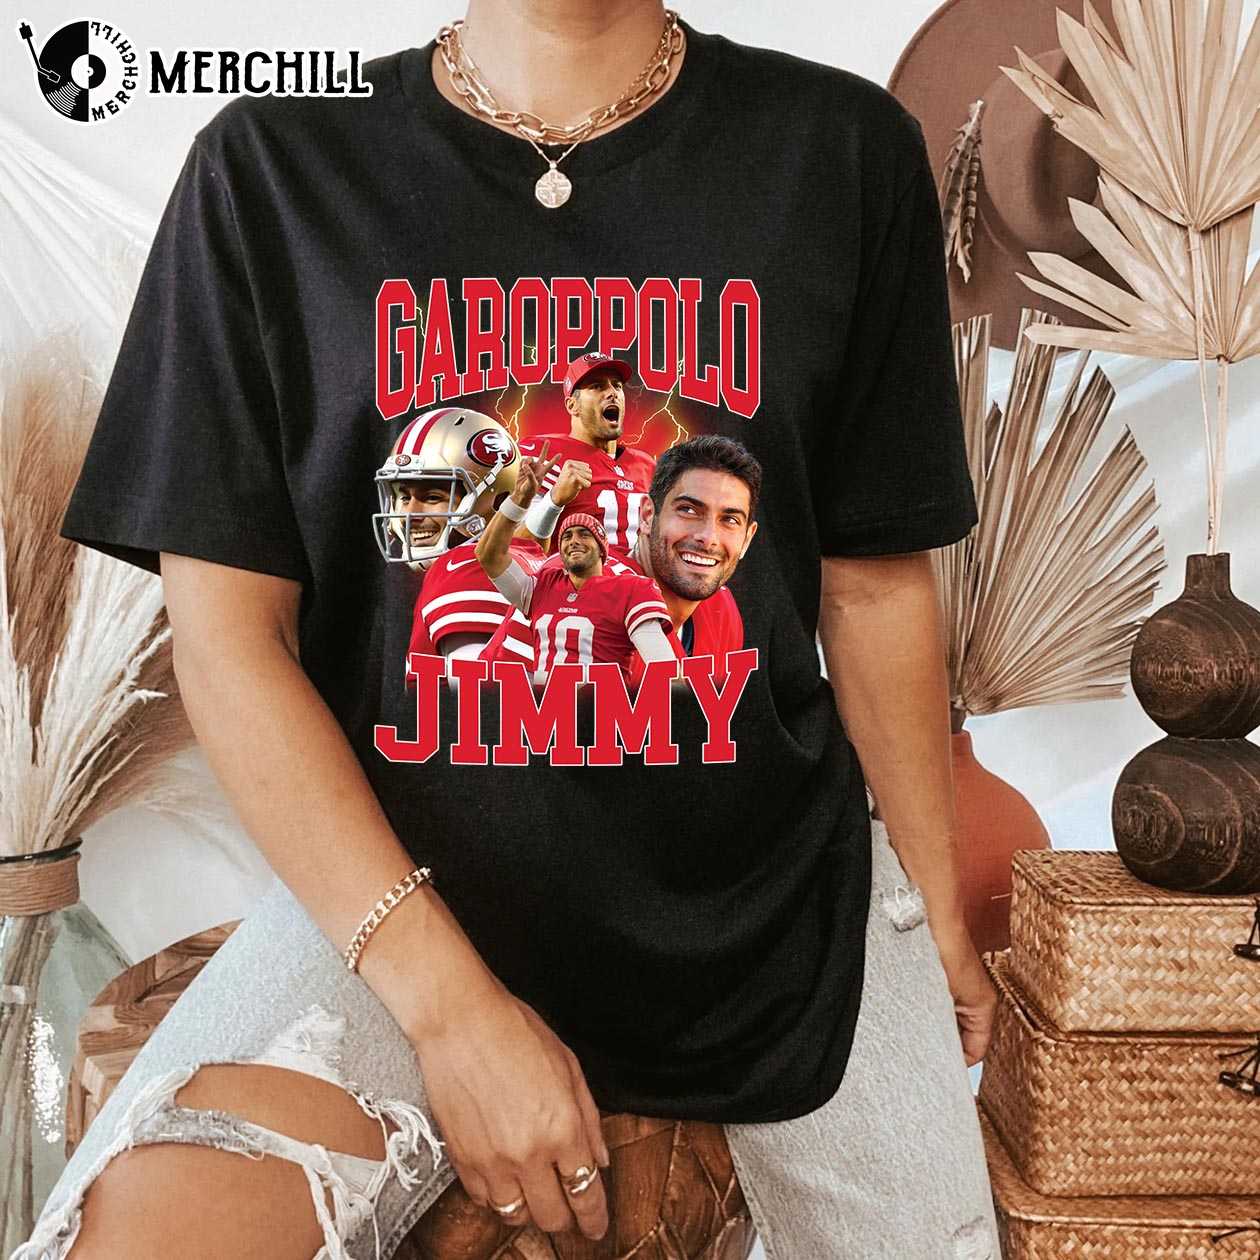 Run CMC 49ers Women's Long Sleeve Shirt 49ers Gifts for Her - Happy Place  for Music Lovers